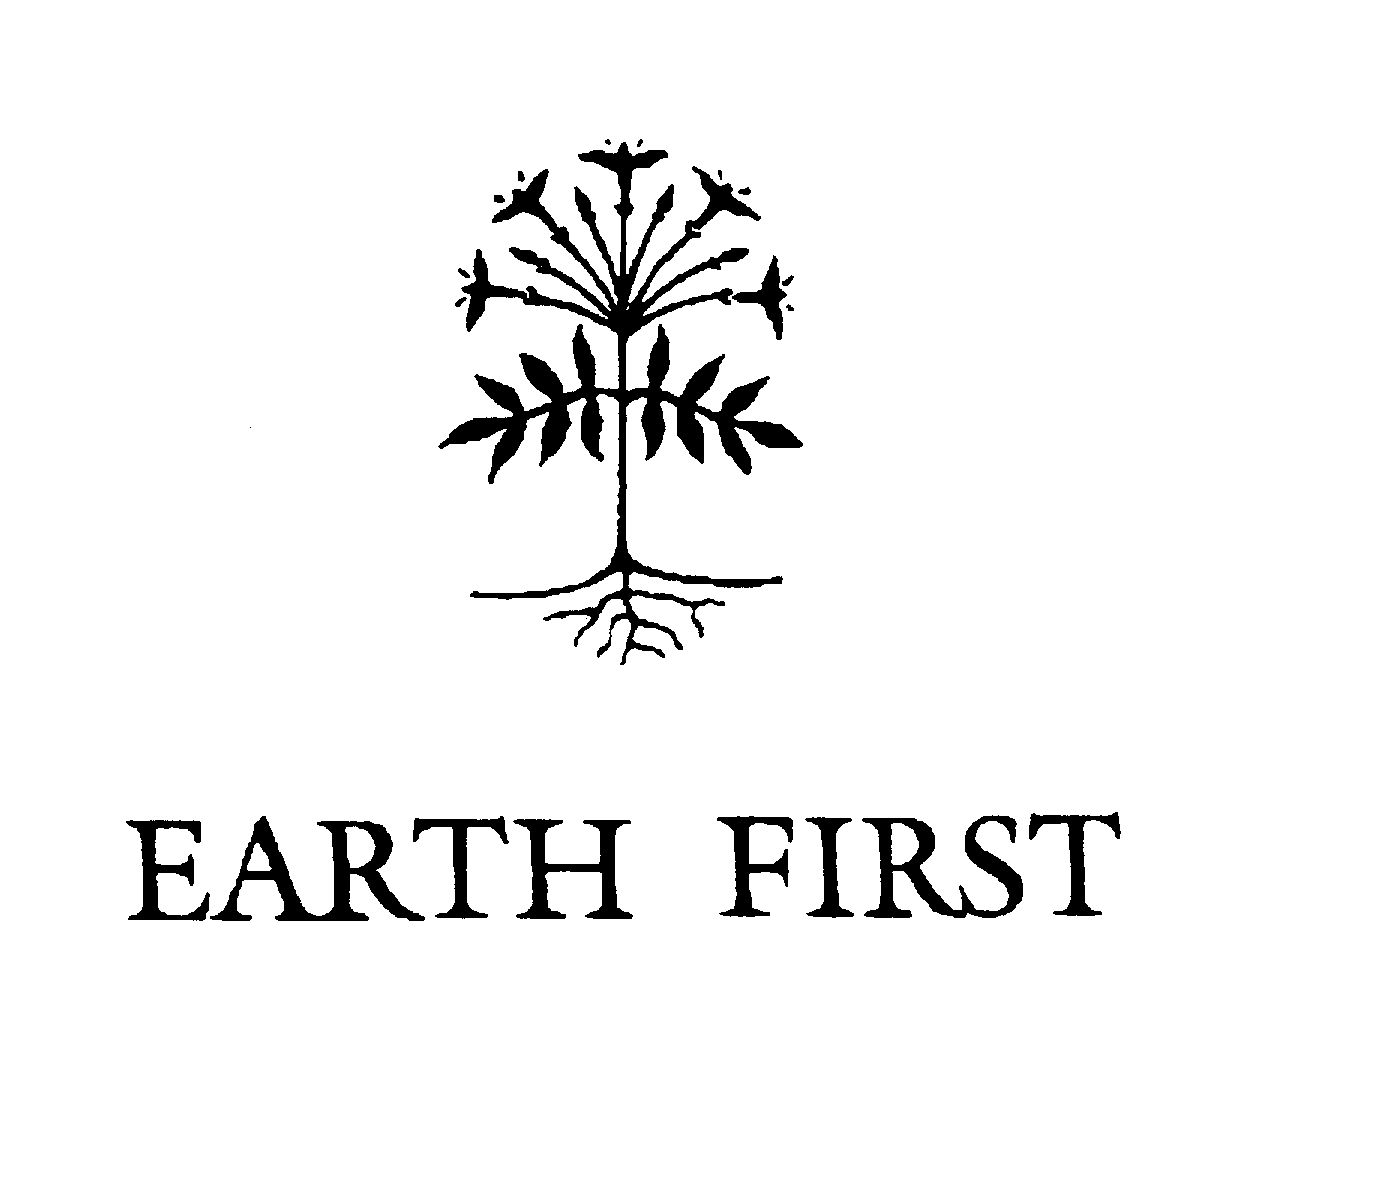 EARTH FIRST